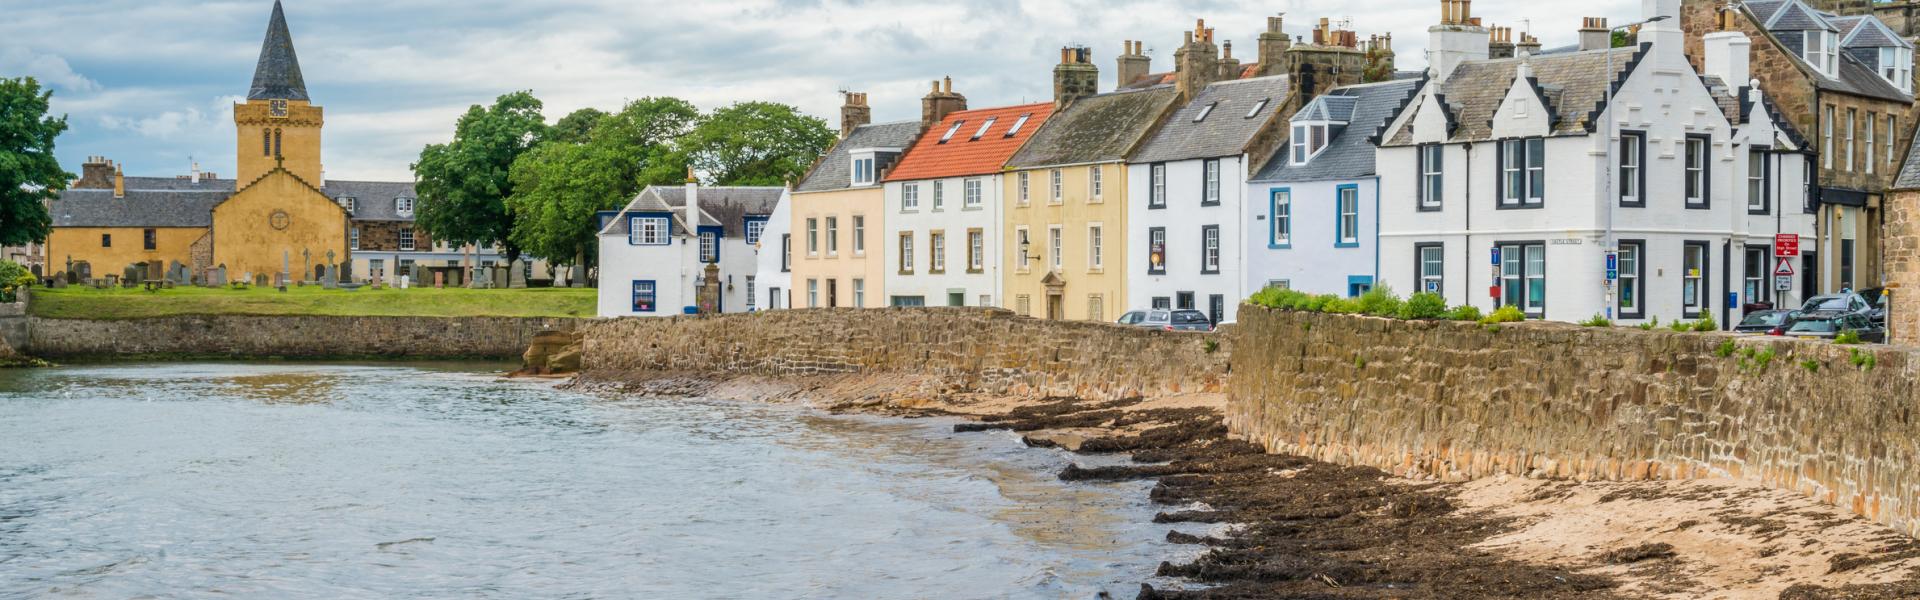 Holiday lettings & accommodation in Pittenweem - HomeToGo